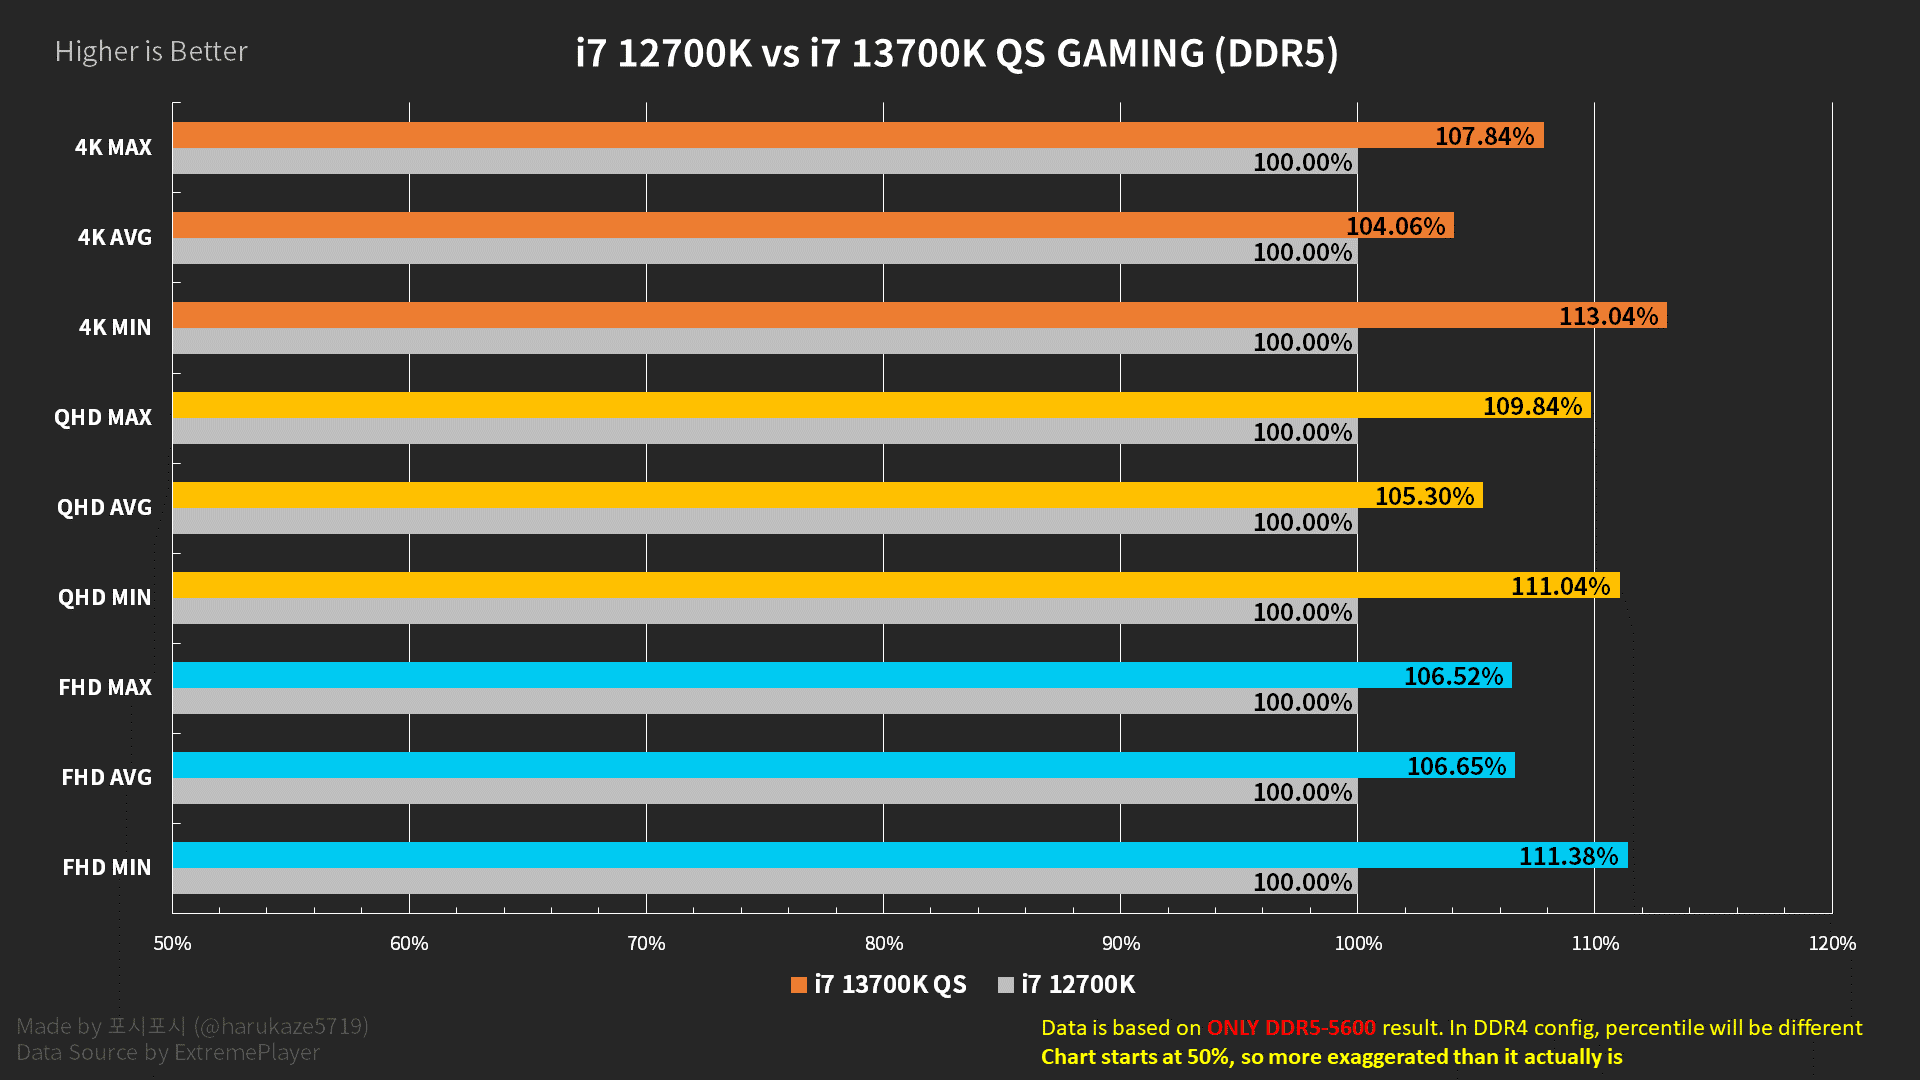 Core i7-12700K vs. Core i7-13700K(ES) with DDR4 and DDR5